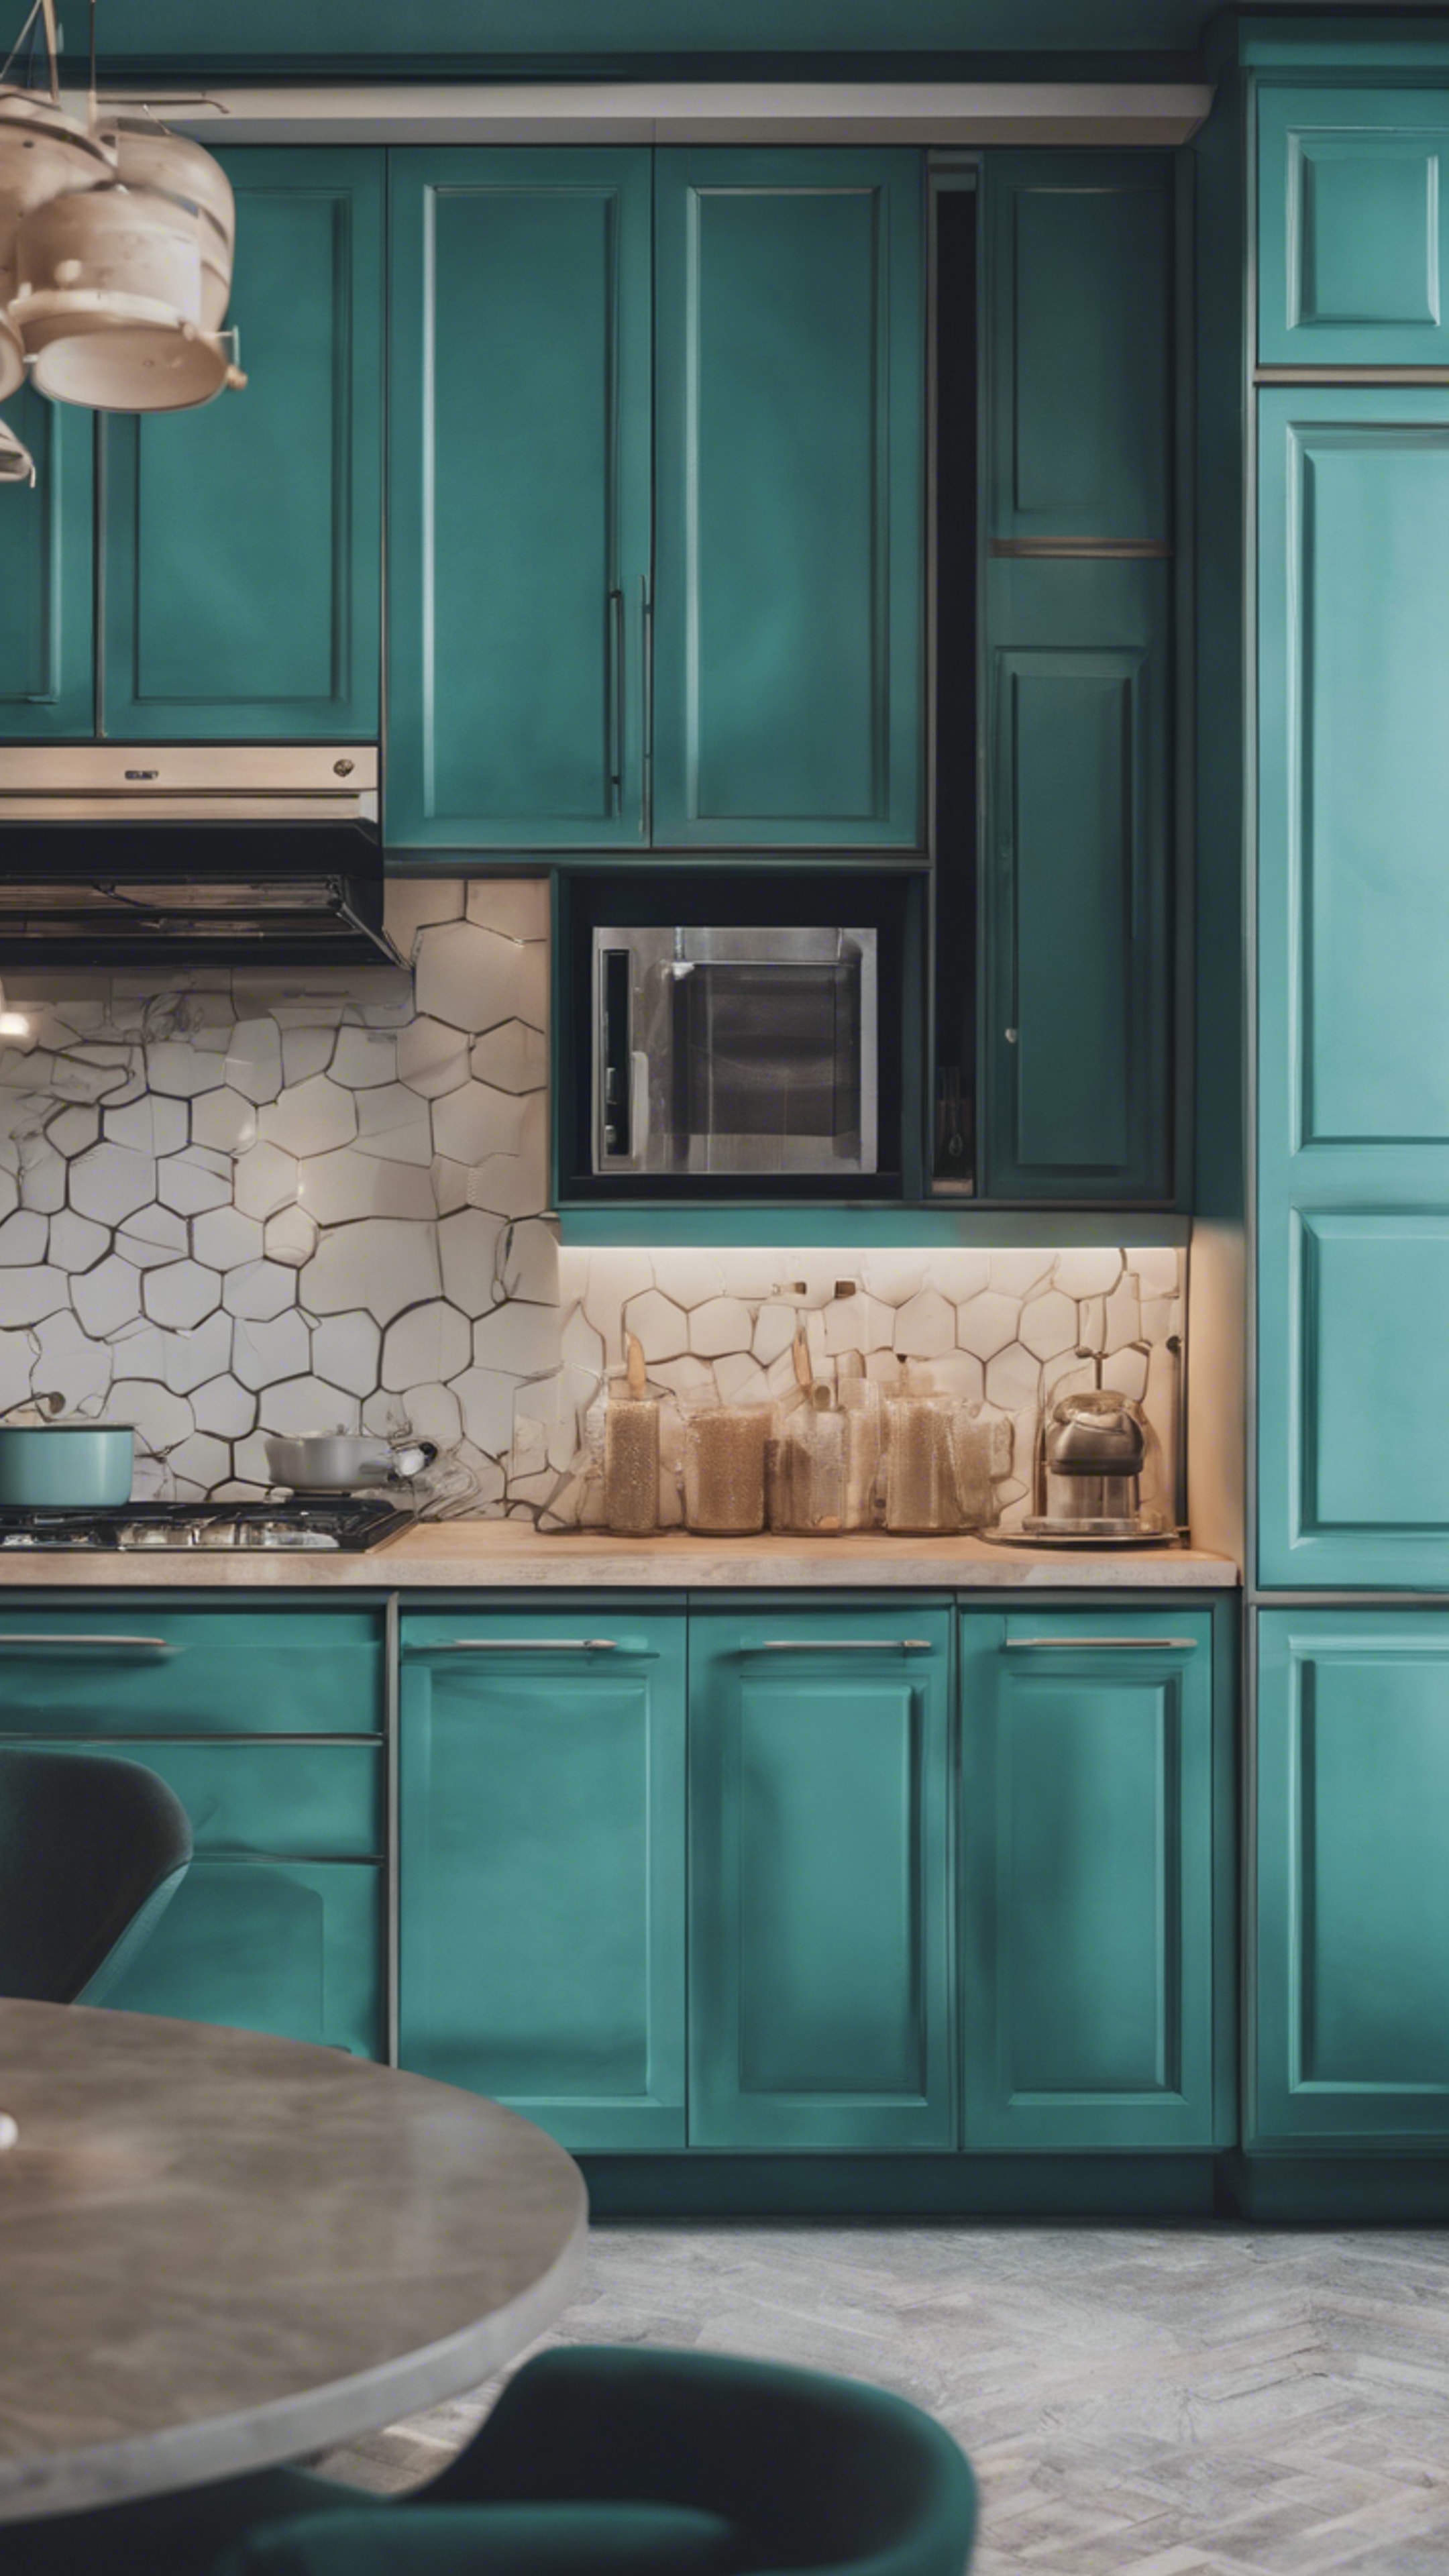 A modern kitchen design dominated by the cool teal color scheme. Wallpaper[5d7f72f16c9b4154a26c]